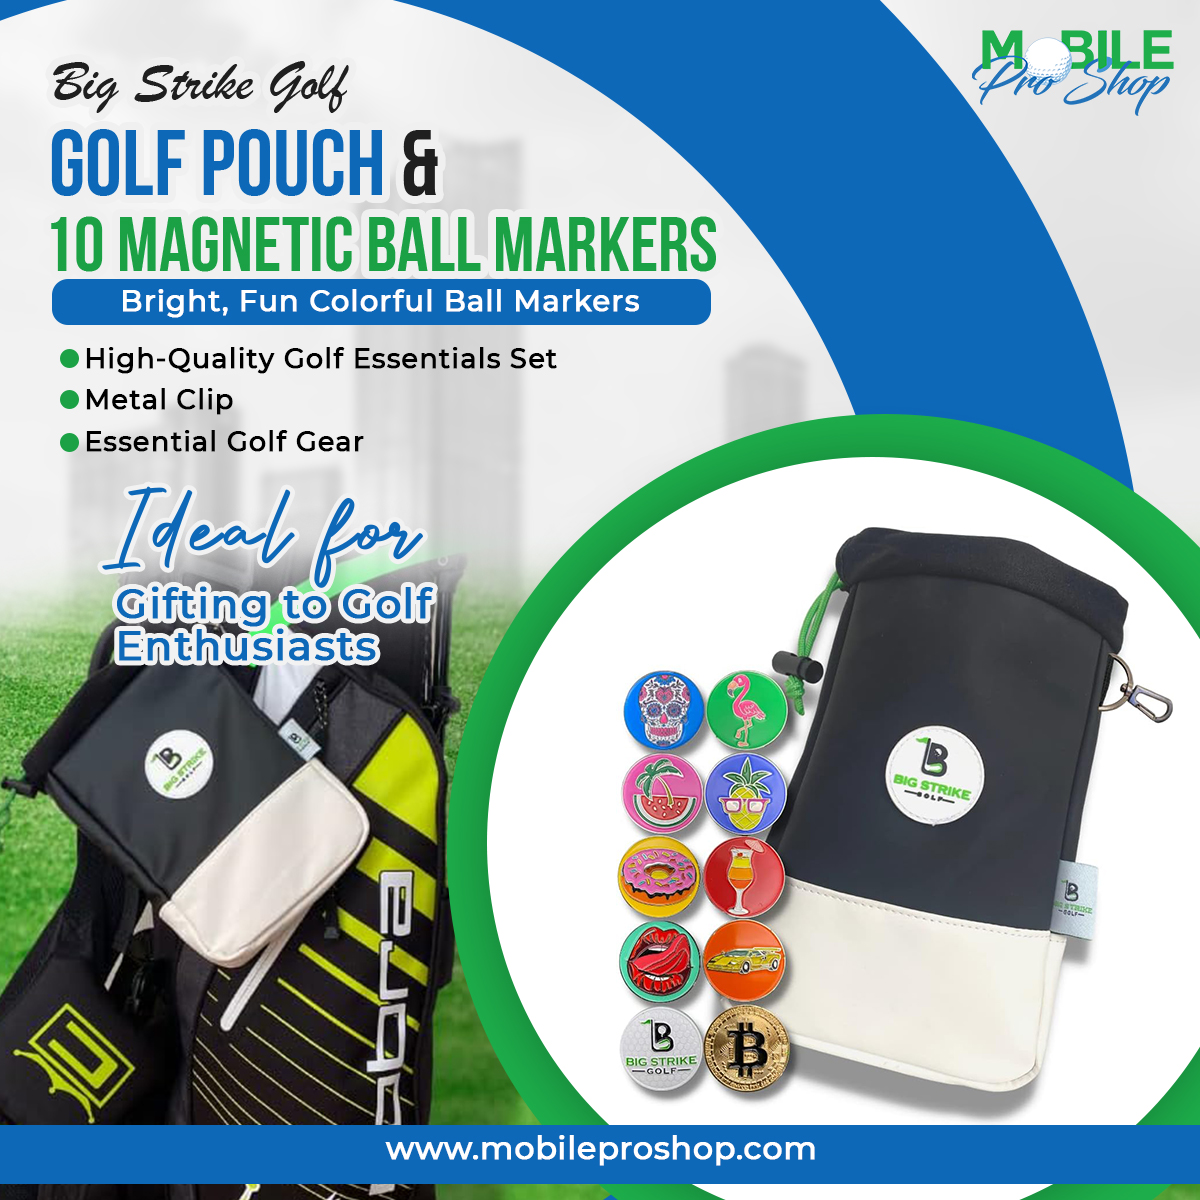 Big Strike Golf - Golf Pouch and 10 Magnetic Ball Markers. Bright, Fun Colorful Ball Markers. Golf Accessories Top Pick. (Golf Pouch + 10 Magnetic Ball Markers)
#BigStrikeGolf #GolfPouch #MagneticBallMarkers #GolfAccessories #StylishMarkers #GolfGear